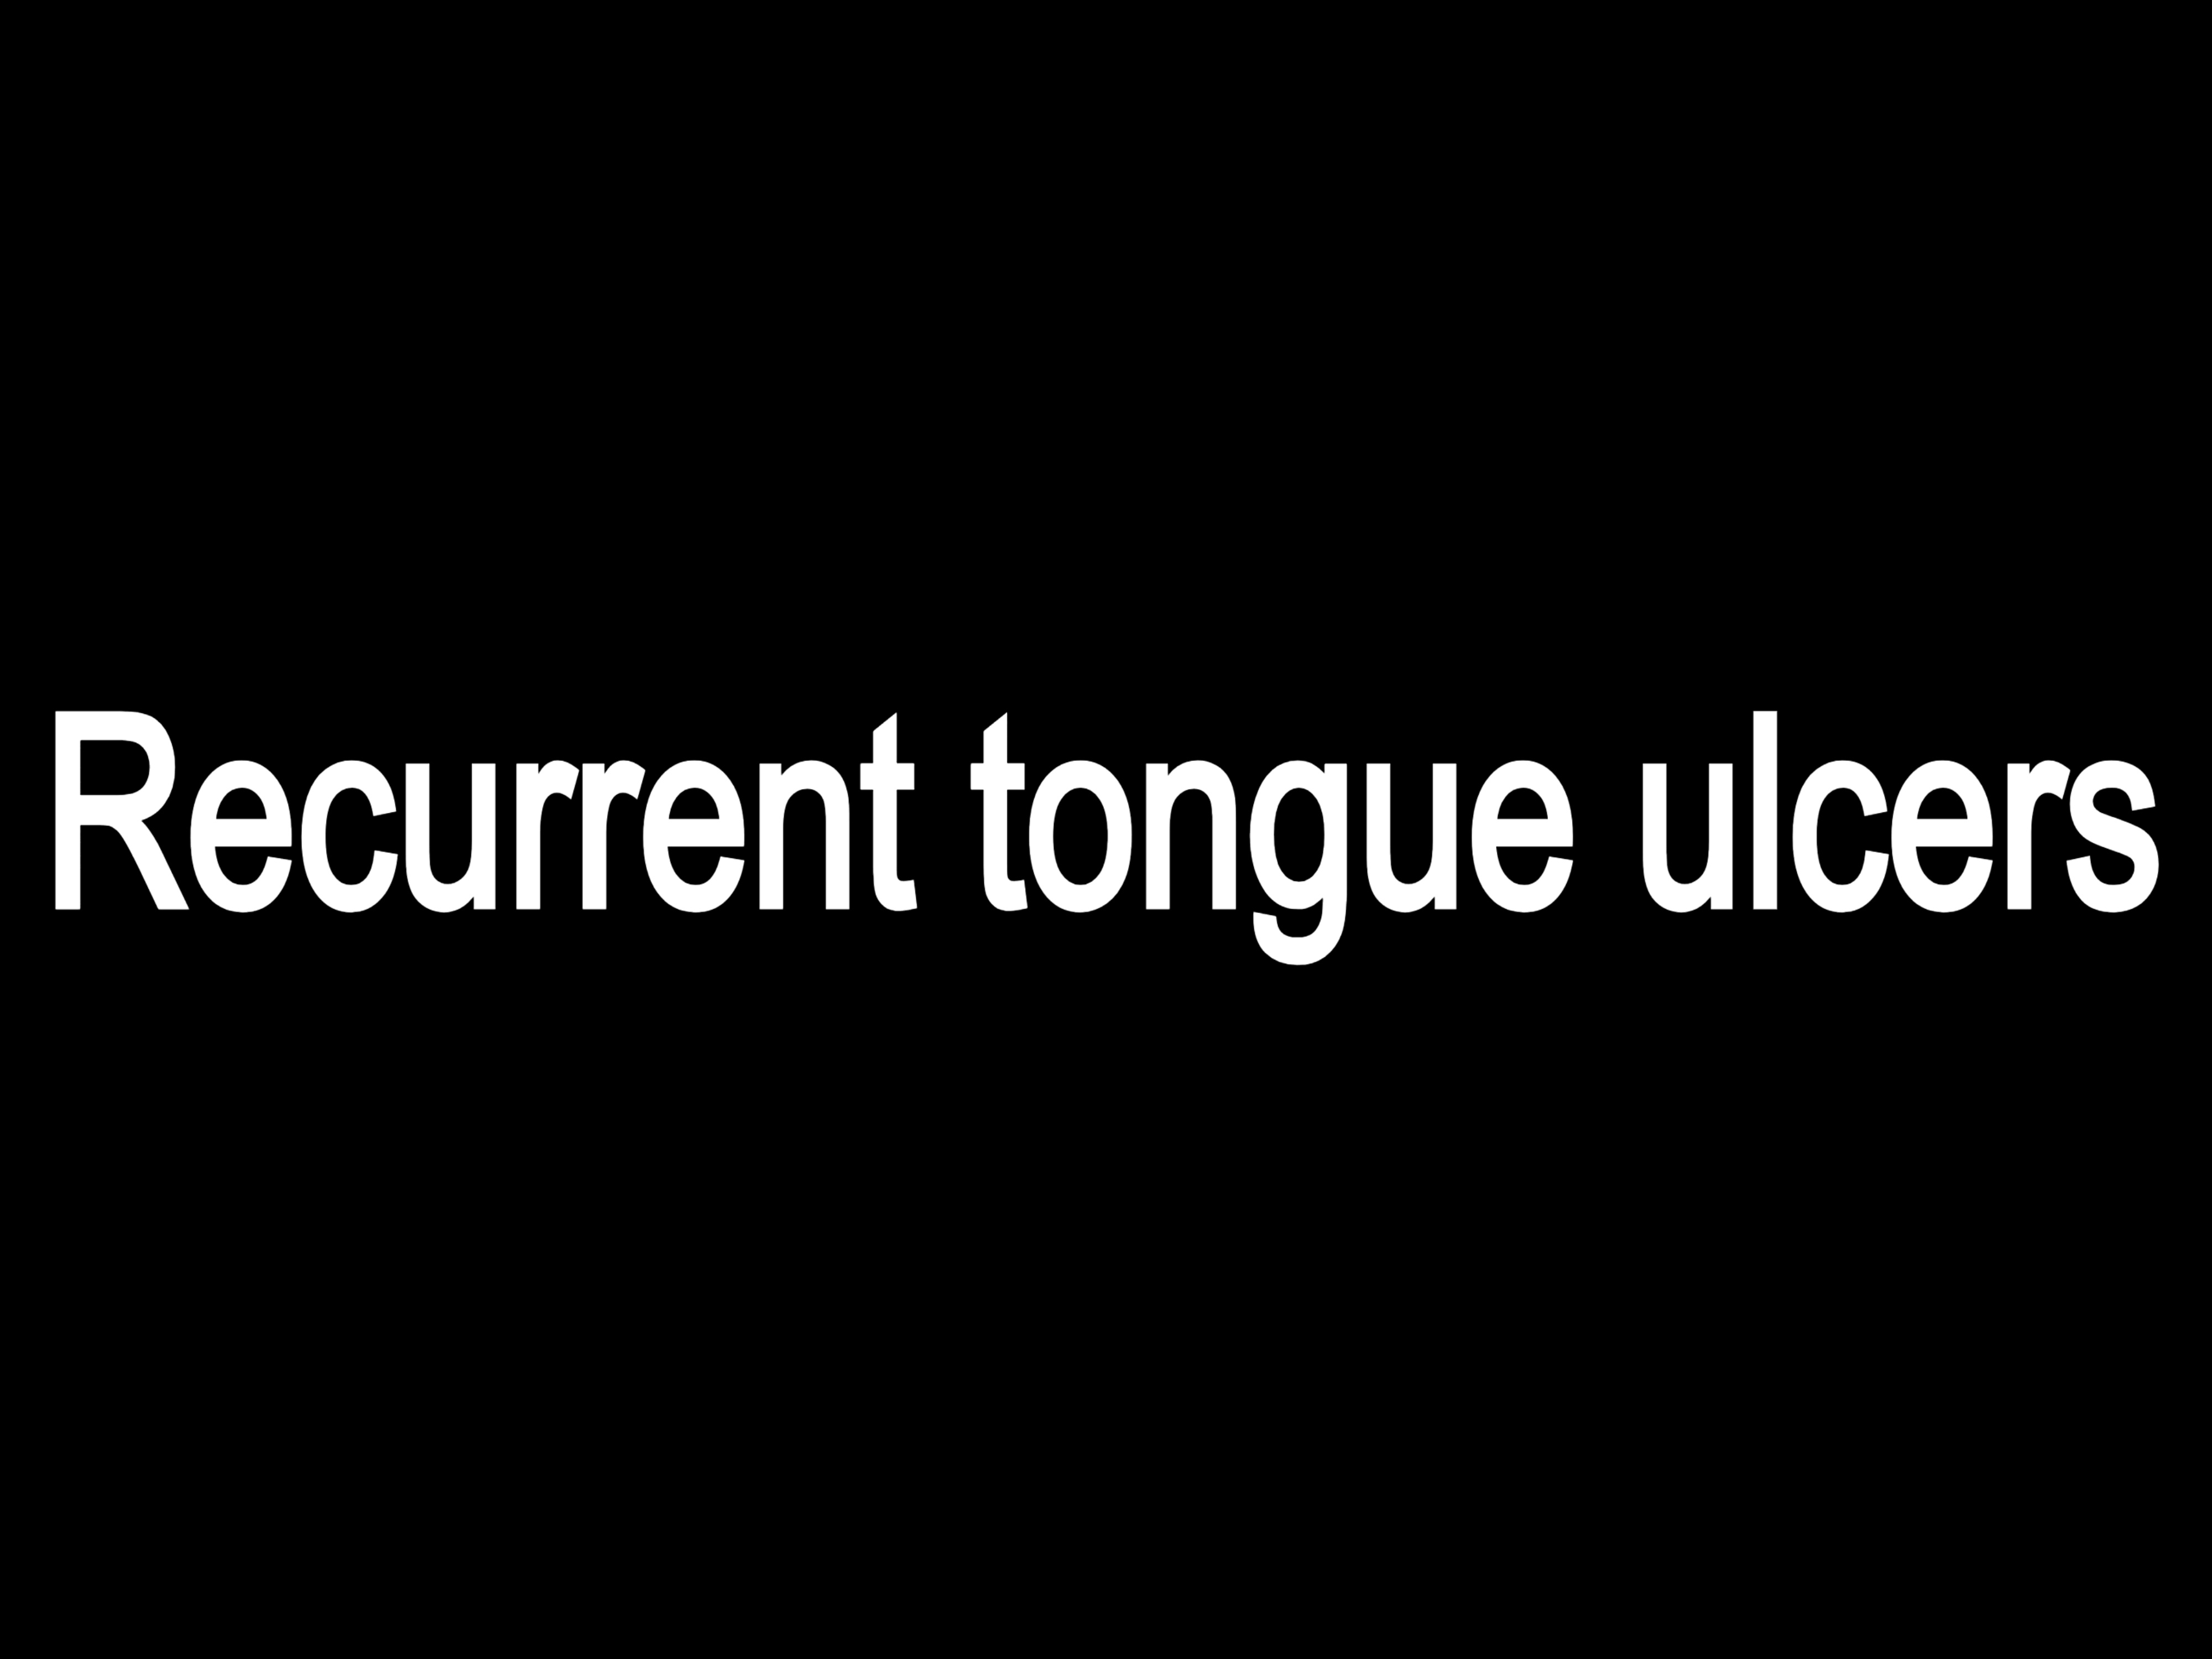 Recurrent tongue ulcers